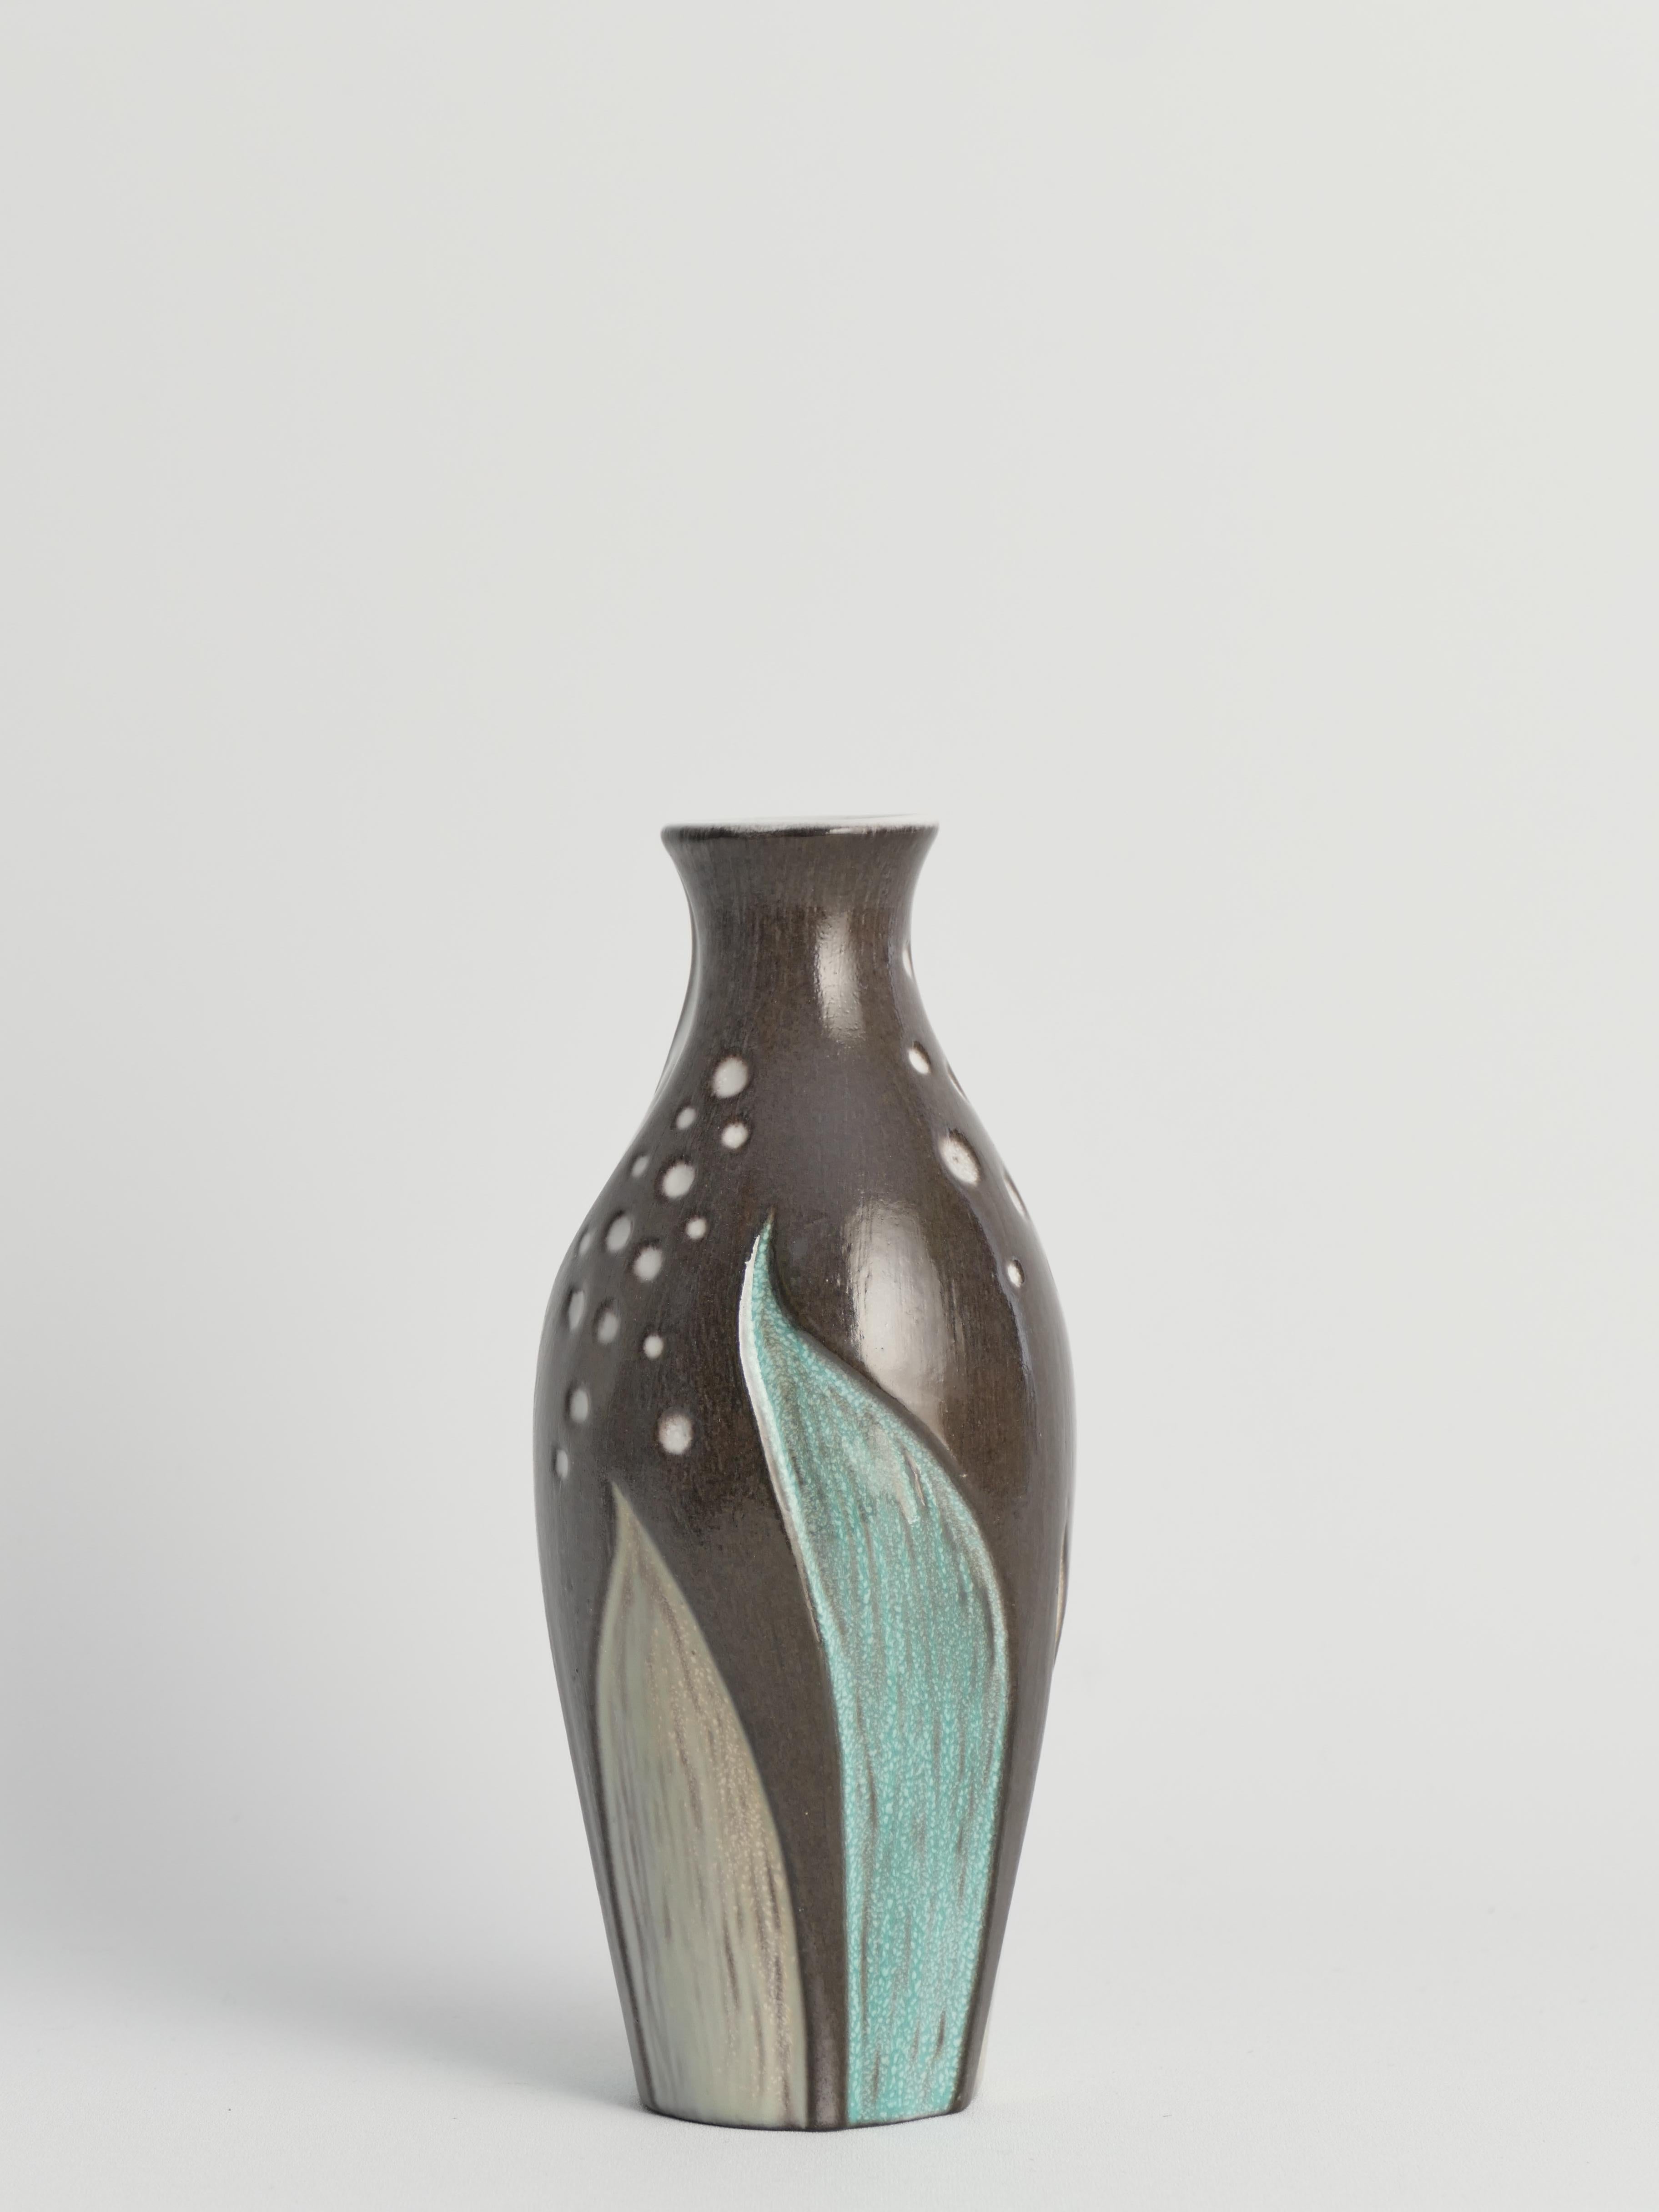 This scandinavian modern ceramic vase with seaweed motif by Mari Simmulson for Upsala Ekeby, Sweden 1950 is adorable!

Crafted between 1958-61, this stunning Mari Simmulson Upsala-Ekeby vase is a testament to the renowned Swedish ceramic design of